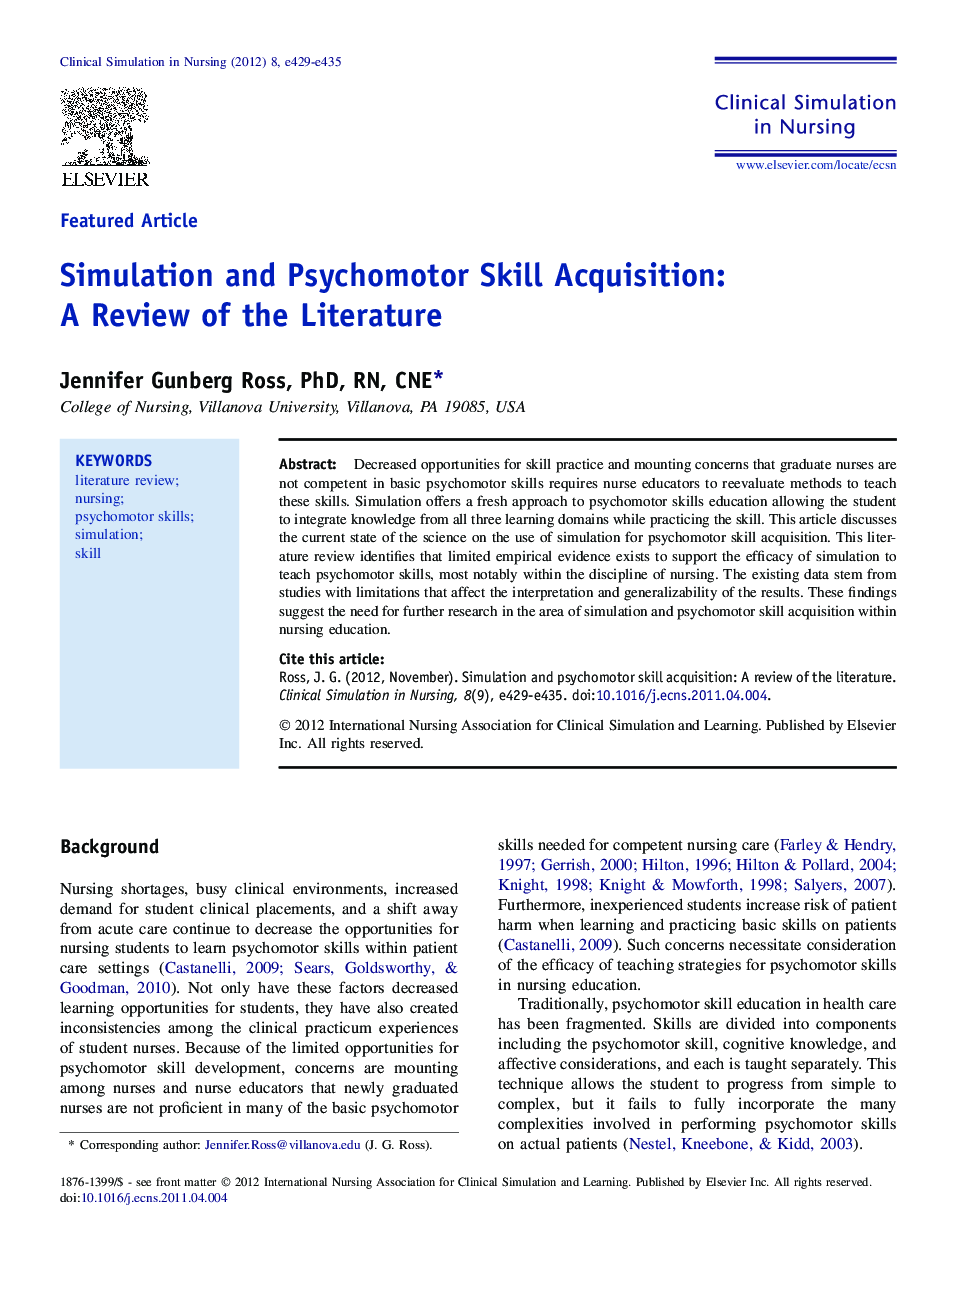 Simulation and Psychomotor Skill Acquisition: A Review of the Literature